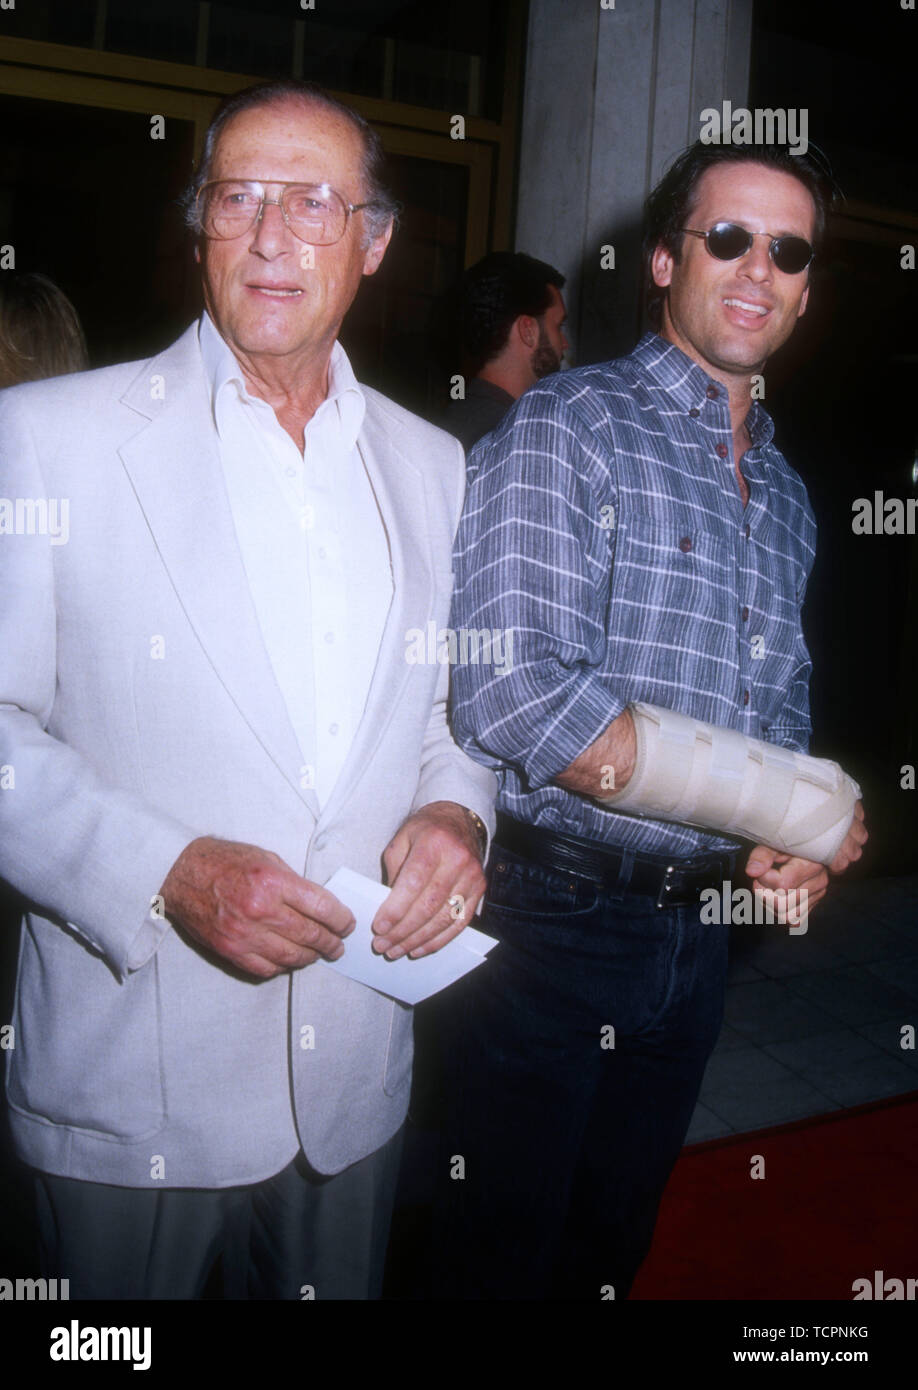 Westwood, California, USA 28th June 1994 Actor Hart Bochner and father Lloyd Bochner attend the premiere of 'Blown Away' on June 28, 1994 at Mann National Theater in Westwood, California, USA. Photo by Barry King/Alamy Stock Photo Stock Photo